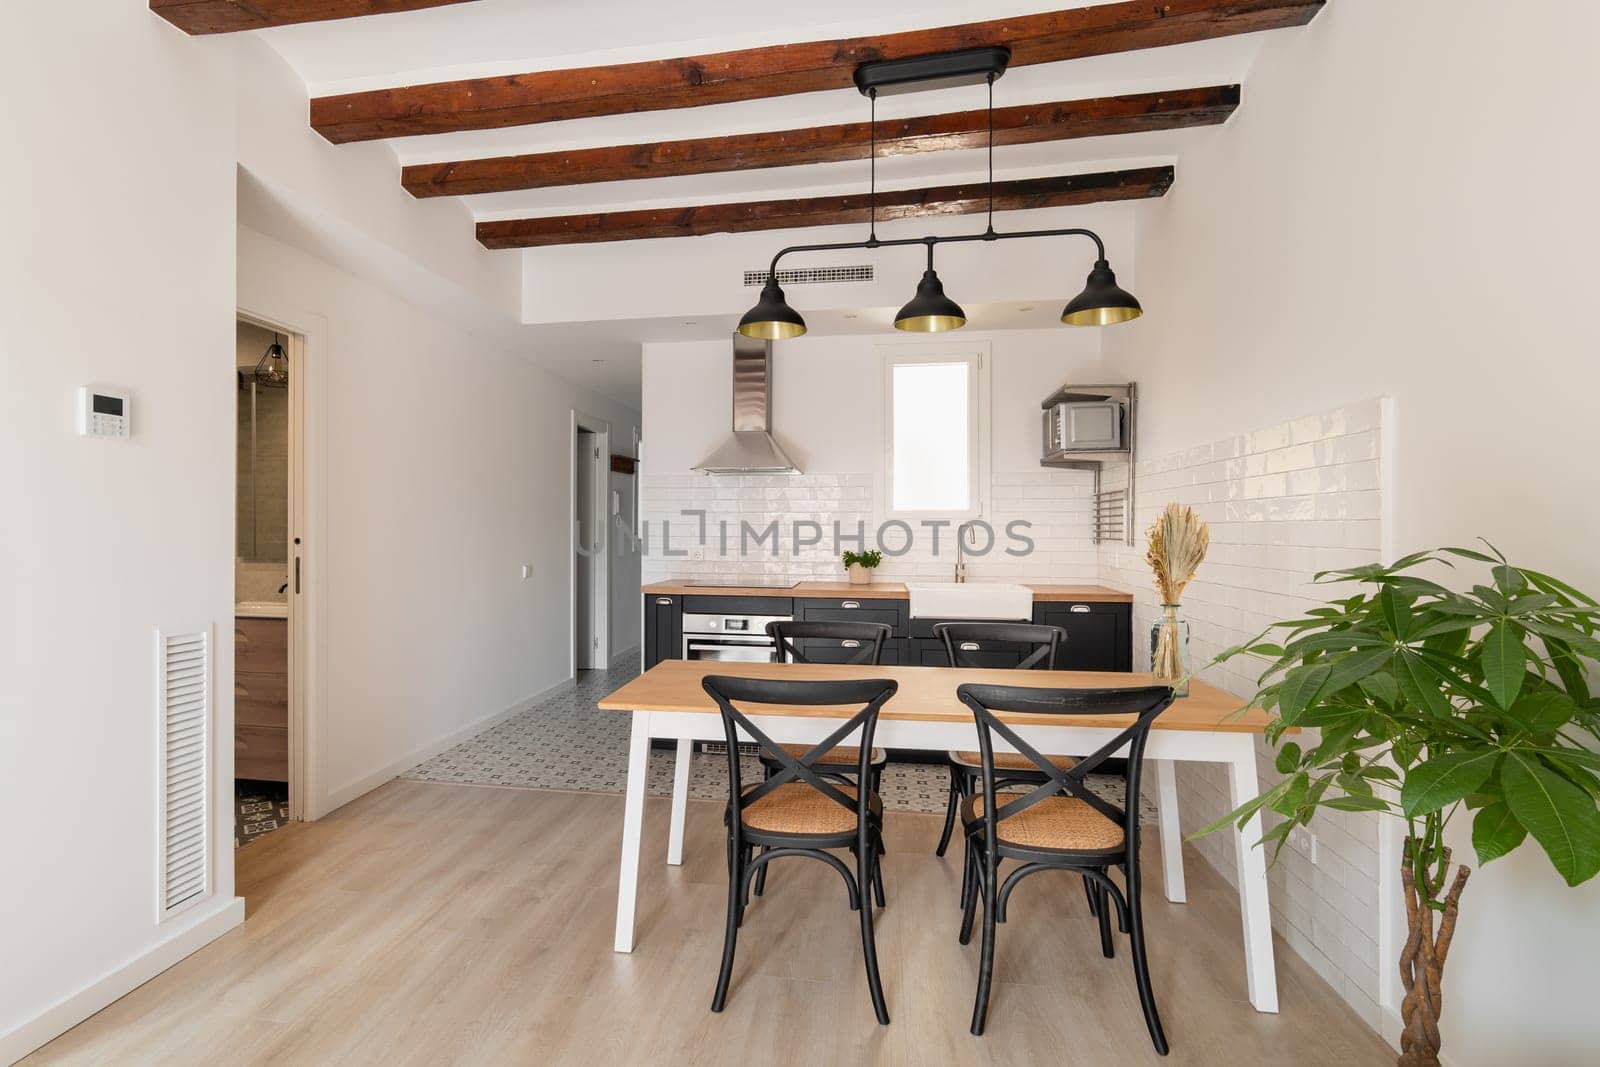 Empty dining table in equipped kitchen area of renovated studio apartment. Simple interior of home residence with place to cook and eat